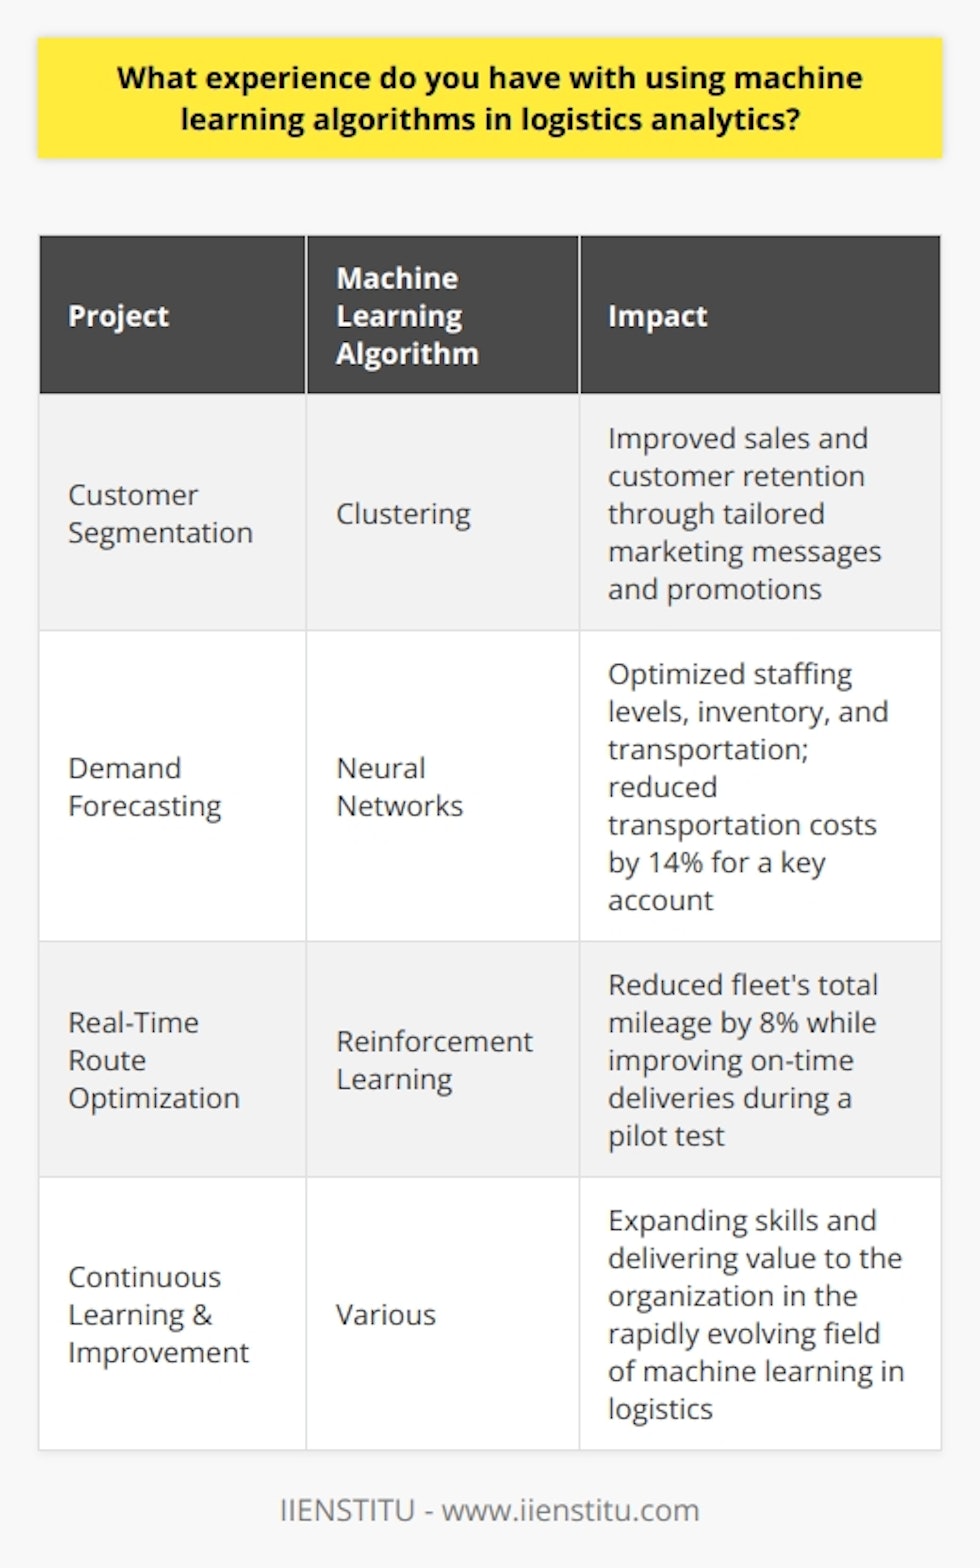 I have had the opportunity to apply machine learning algorithms to logistics analytics challenges in several roles. Early in my career, I worked as a data analyst for a large retailer. My team used clustering algorithms to segment customers based on their purchasing patterns. This allowed the company to  tailor marketing messages and promotions  to each group, improving sales and customer retention. Demand Forecasting Models More recently, as a data scientist at a 3PL provider, I built demand forecasting models using neural networks. By analyzing historical sales data,  seasonality trends , and external factors like weather and economic indicators, the models predicted future order volumes. This enabled the company to optimize staffing levels, inventory, and transportation. In one case, the improved forecasting accuracy led to a <u>14% reduction in transportation costs</u> for a key account. Real-Time Route Optimization Im especially proud of a project where I used  reinforcement learning  to dynamically optimize delivery routes in real-time. The algorithm considered vehicle capacity, traffic conditions, customer delivery windows and other constraints. During a pilot test, the optimized routes reduced the fleets total mileage by 8% while improving on-time deliveries. Based on this success, the company is now working to deploy the model across all regions. Continuous Learning & Improvement I really enjoy the challenge of applying machine learning techniques to drive efficiency and uncover insights in logistics. Its a rapidly evolving field with huge potential. Im excited to continue expanding my skills and delivering value to the organization. Let me know if you have any other questions!